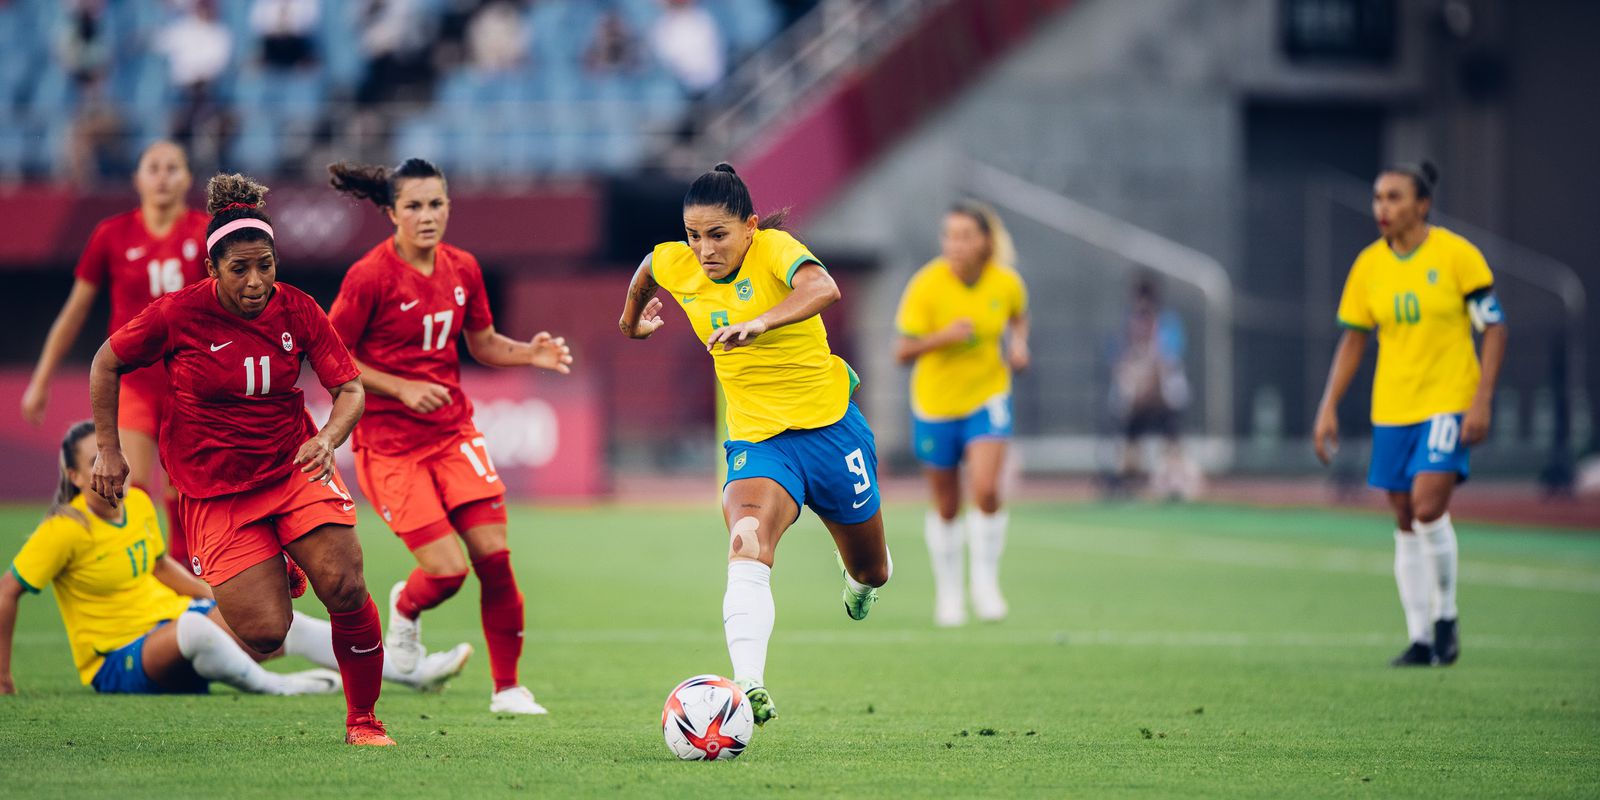 Brazil wants to host the 2027 Women's World Cup